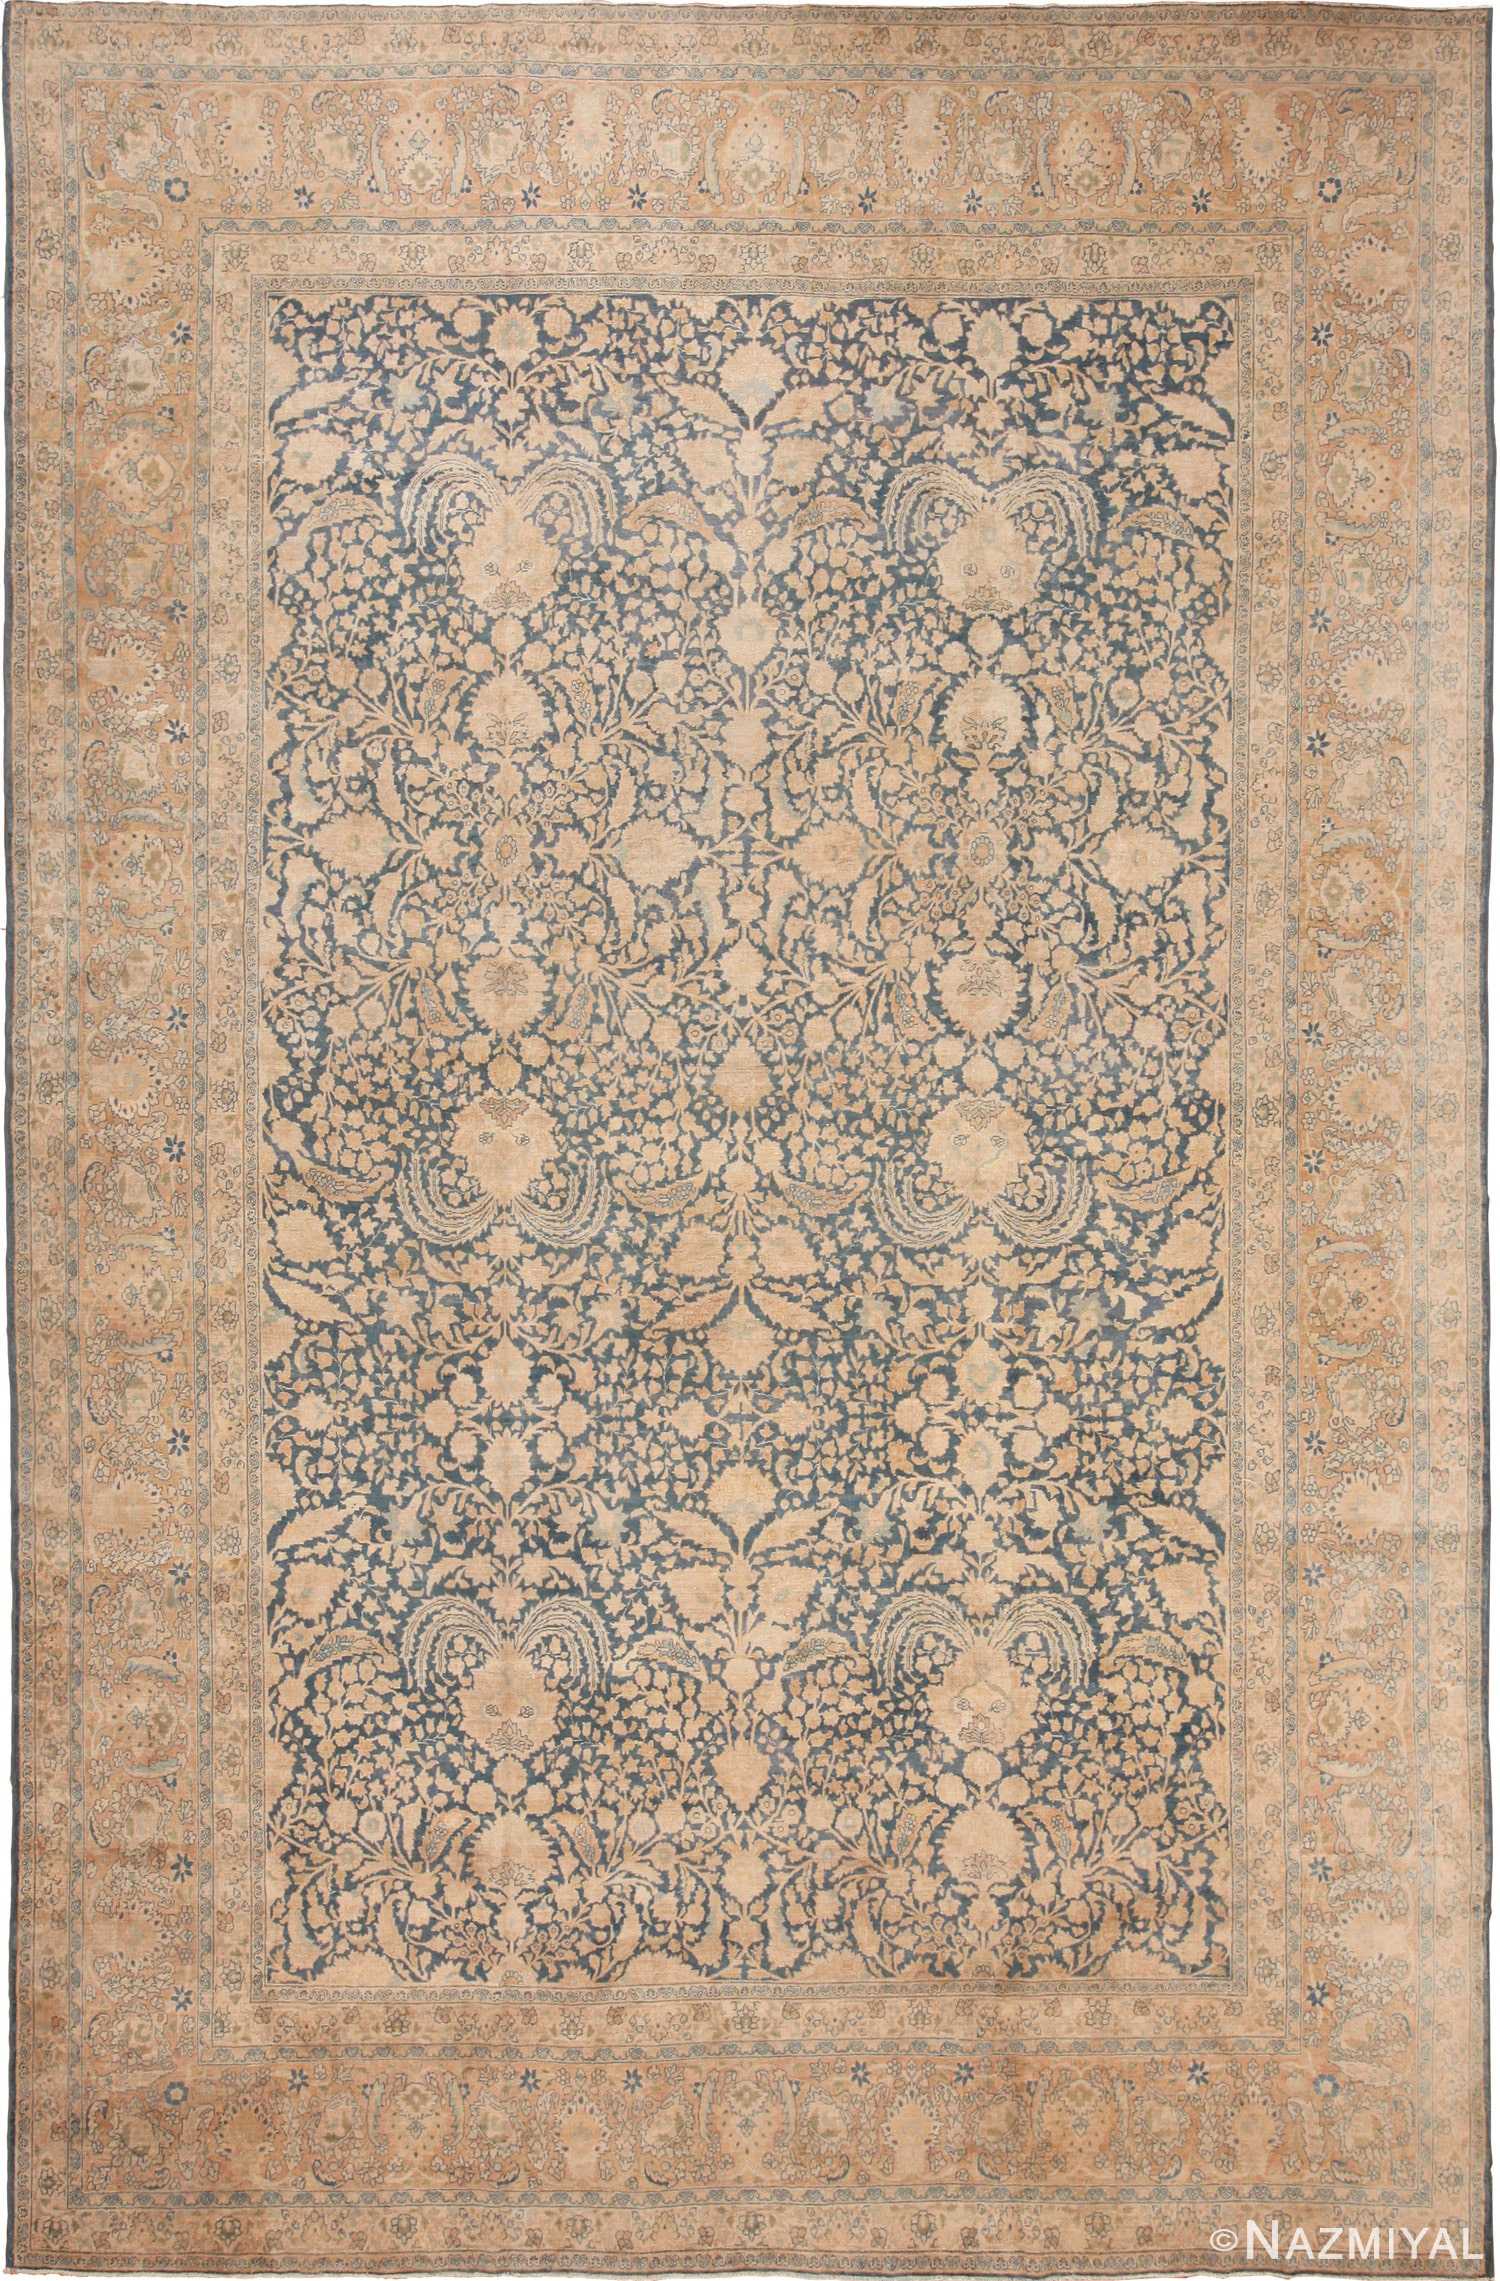 Full view Antique Persian Khorassan rug 49595 by Nazmiyal Antique Rugs